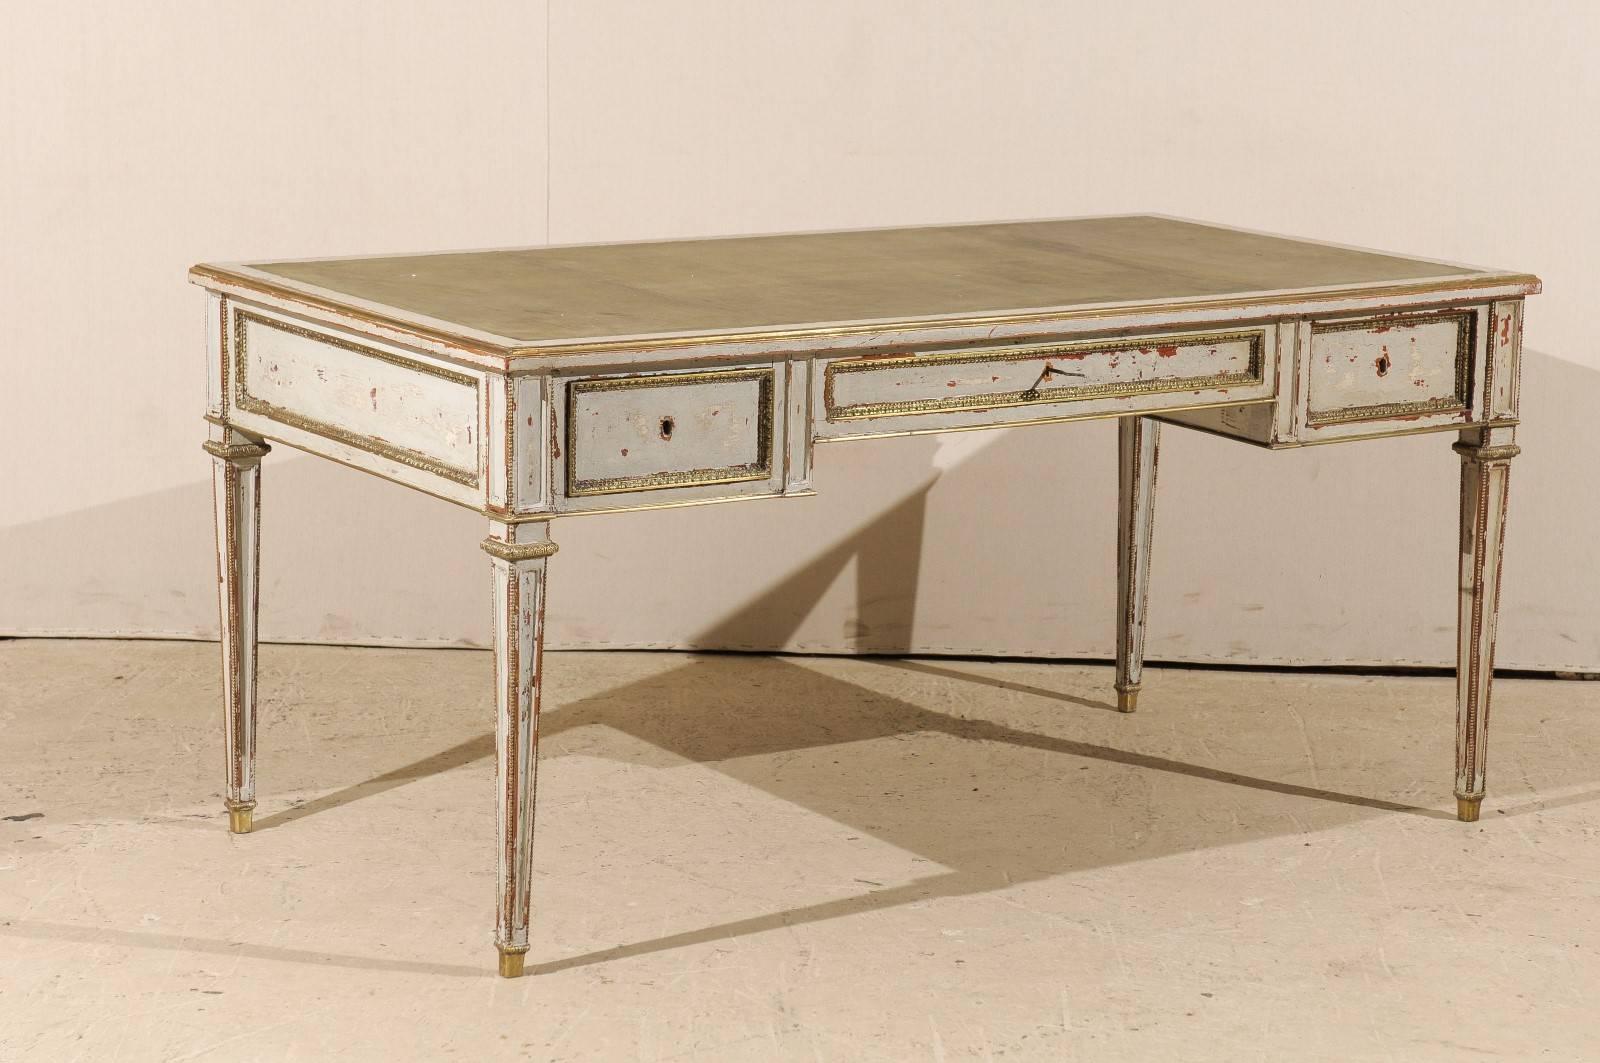 Louis XVI French Painted Desk with Leather Top, Three Drawers and Tapered Legs